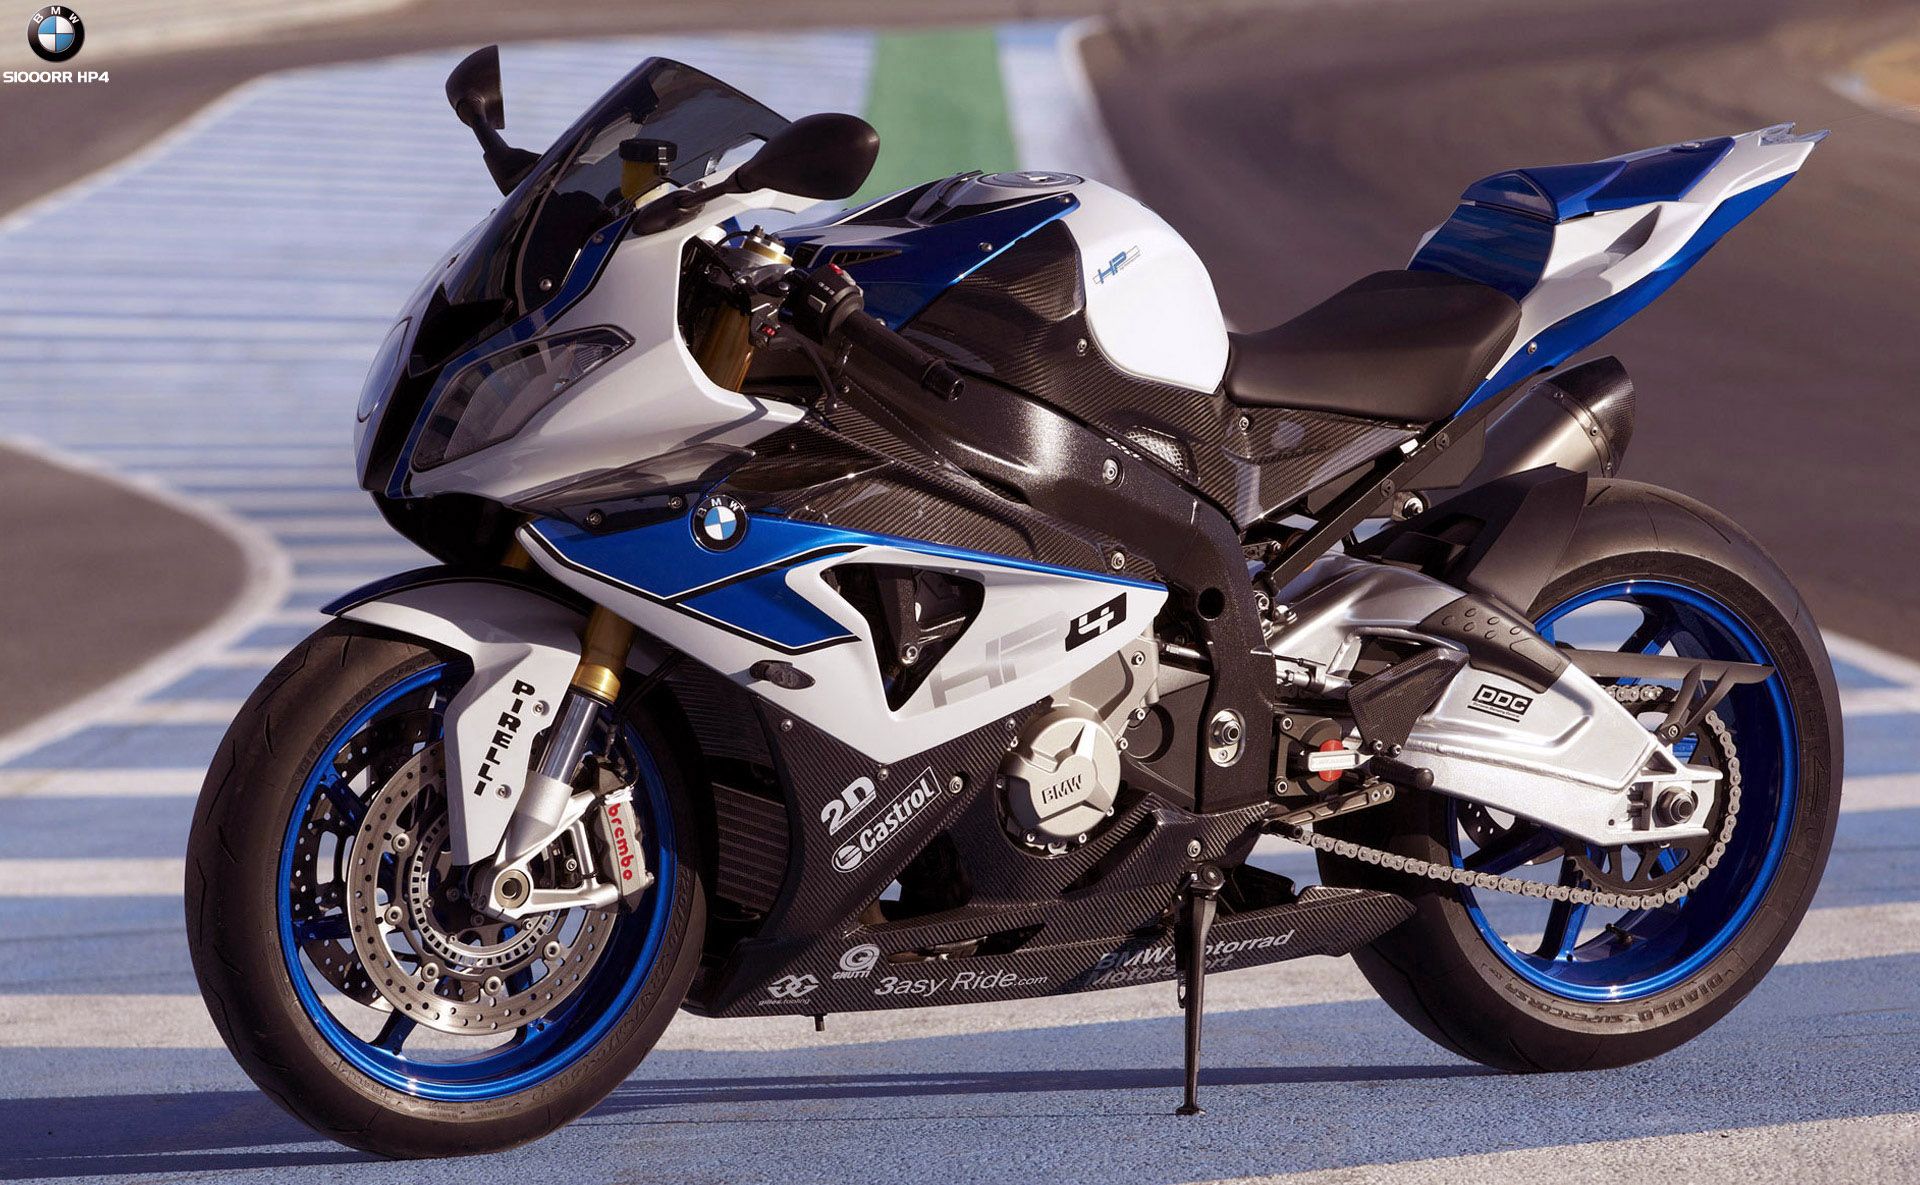 Free Download Hd Stunning Pics Bmw S1000rr Wallpaper Bikes Images Bmw 19x1185 For Your Desktop Mobile Tablet Explore 27 Bmw Motorcycle Wallpapers Bmw Motorcycle Wallpapers Motorcycle Wallpapers Motorcycle Wallpaper